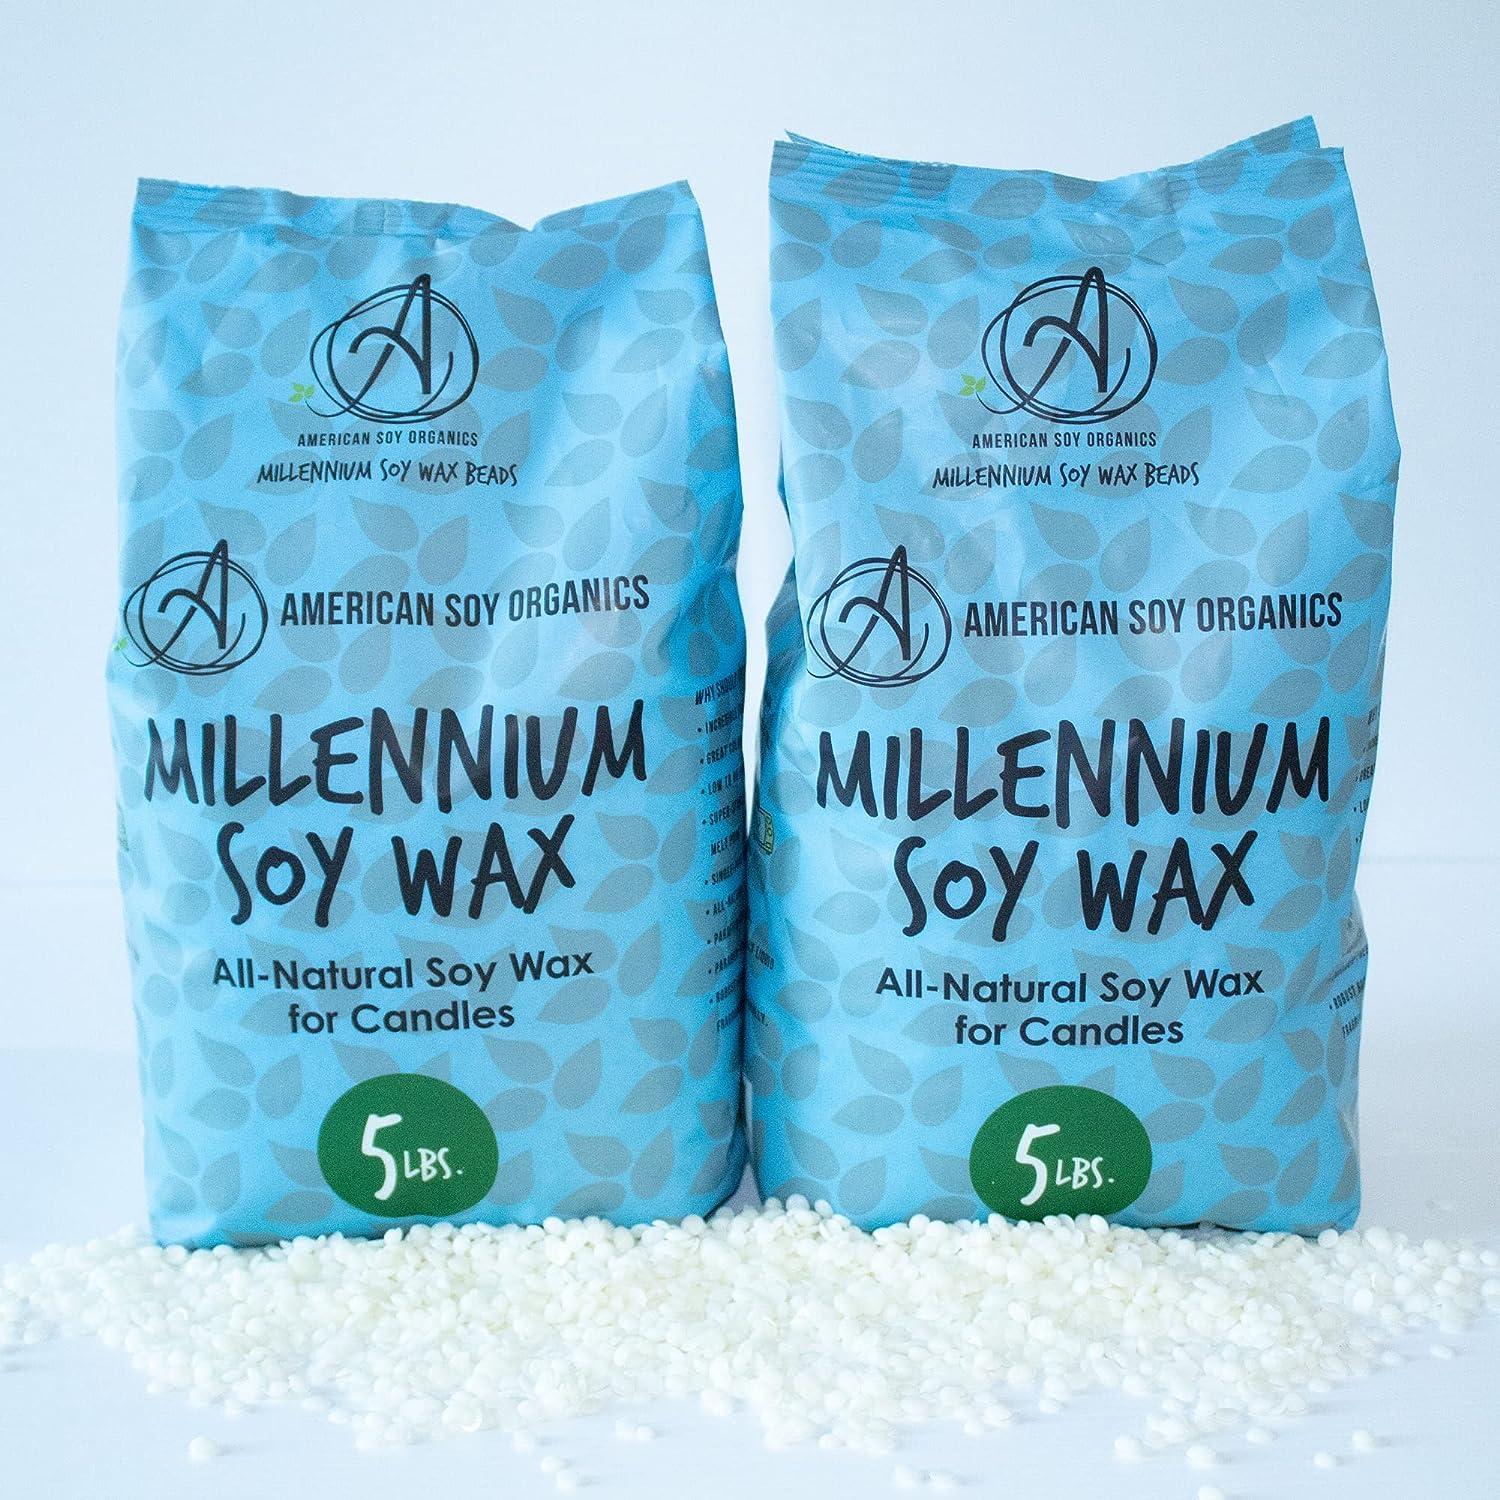 American Soy Organics Millennium Wax - 10 lb Bag of Natural Soy Wax for  Candle Making 10 pound bag